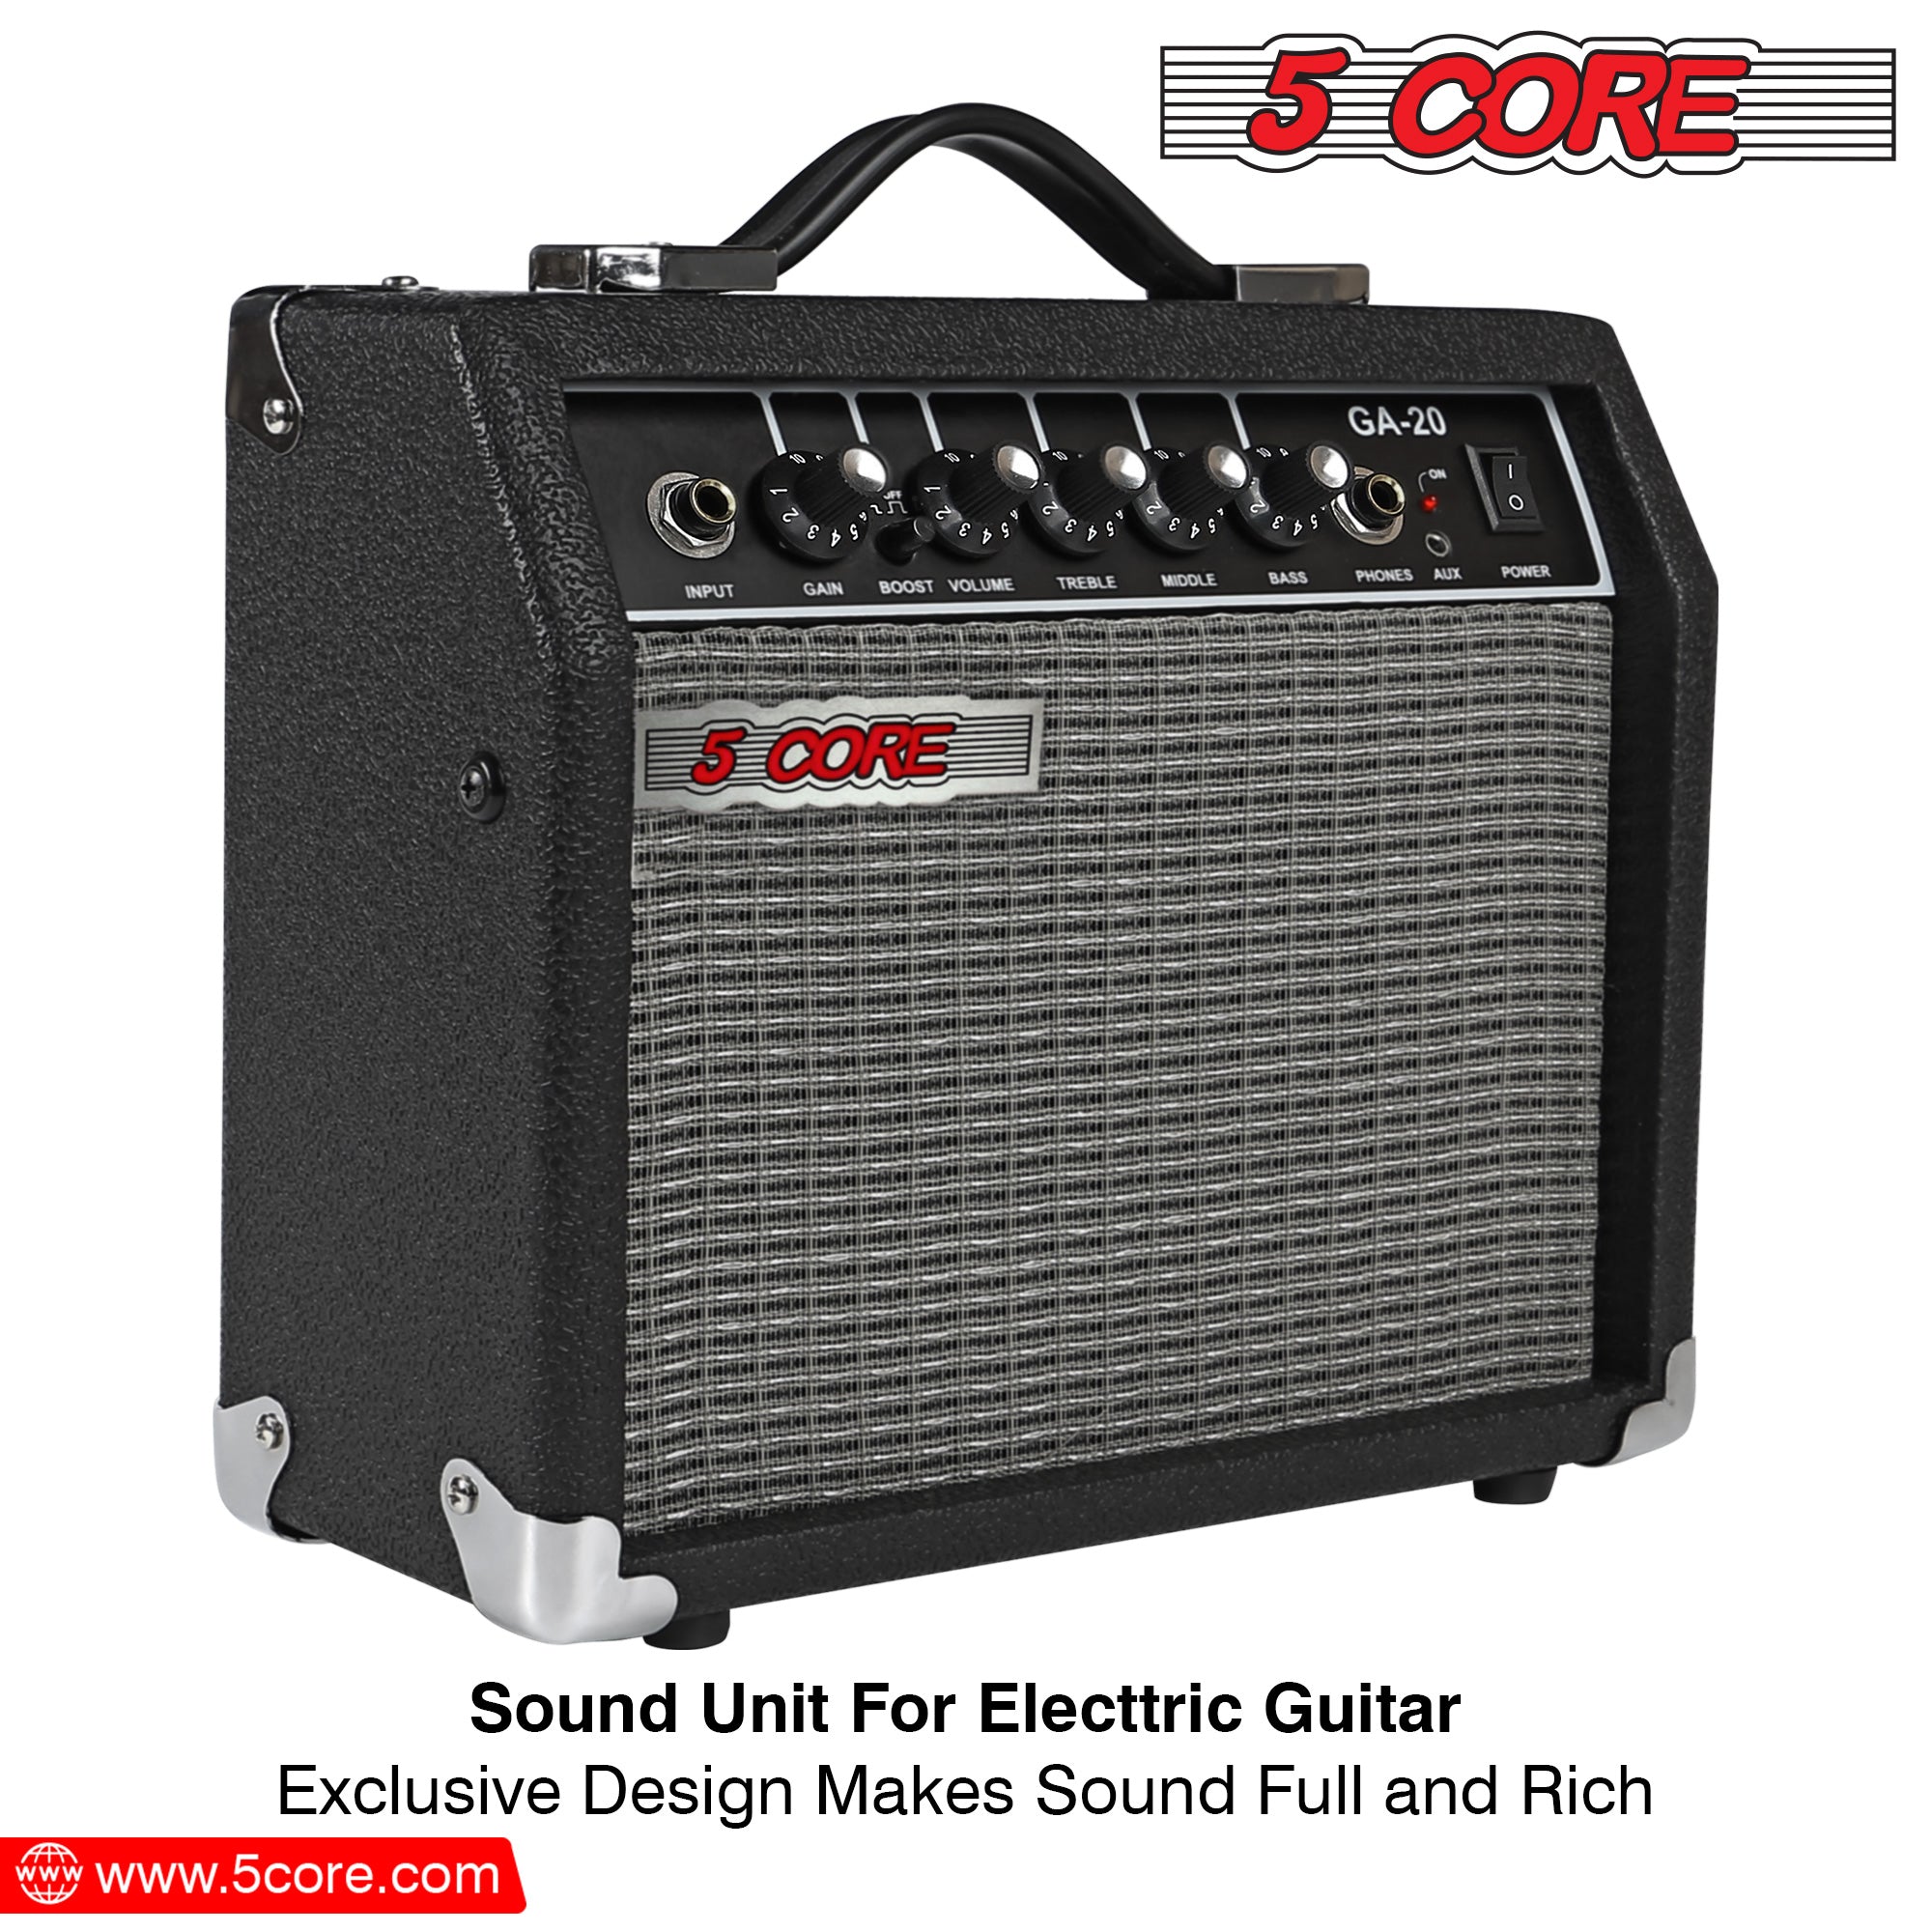 Versatile 40W amp optimized for distortion-free sound with various instruments.